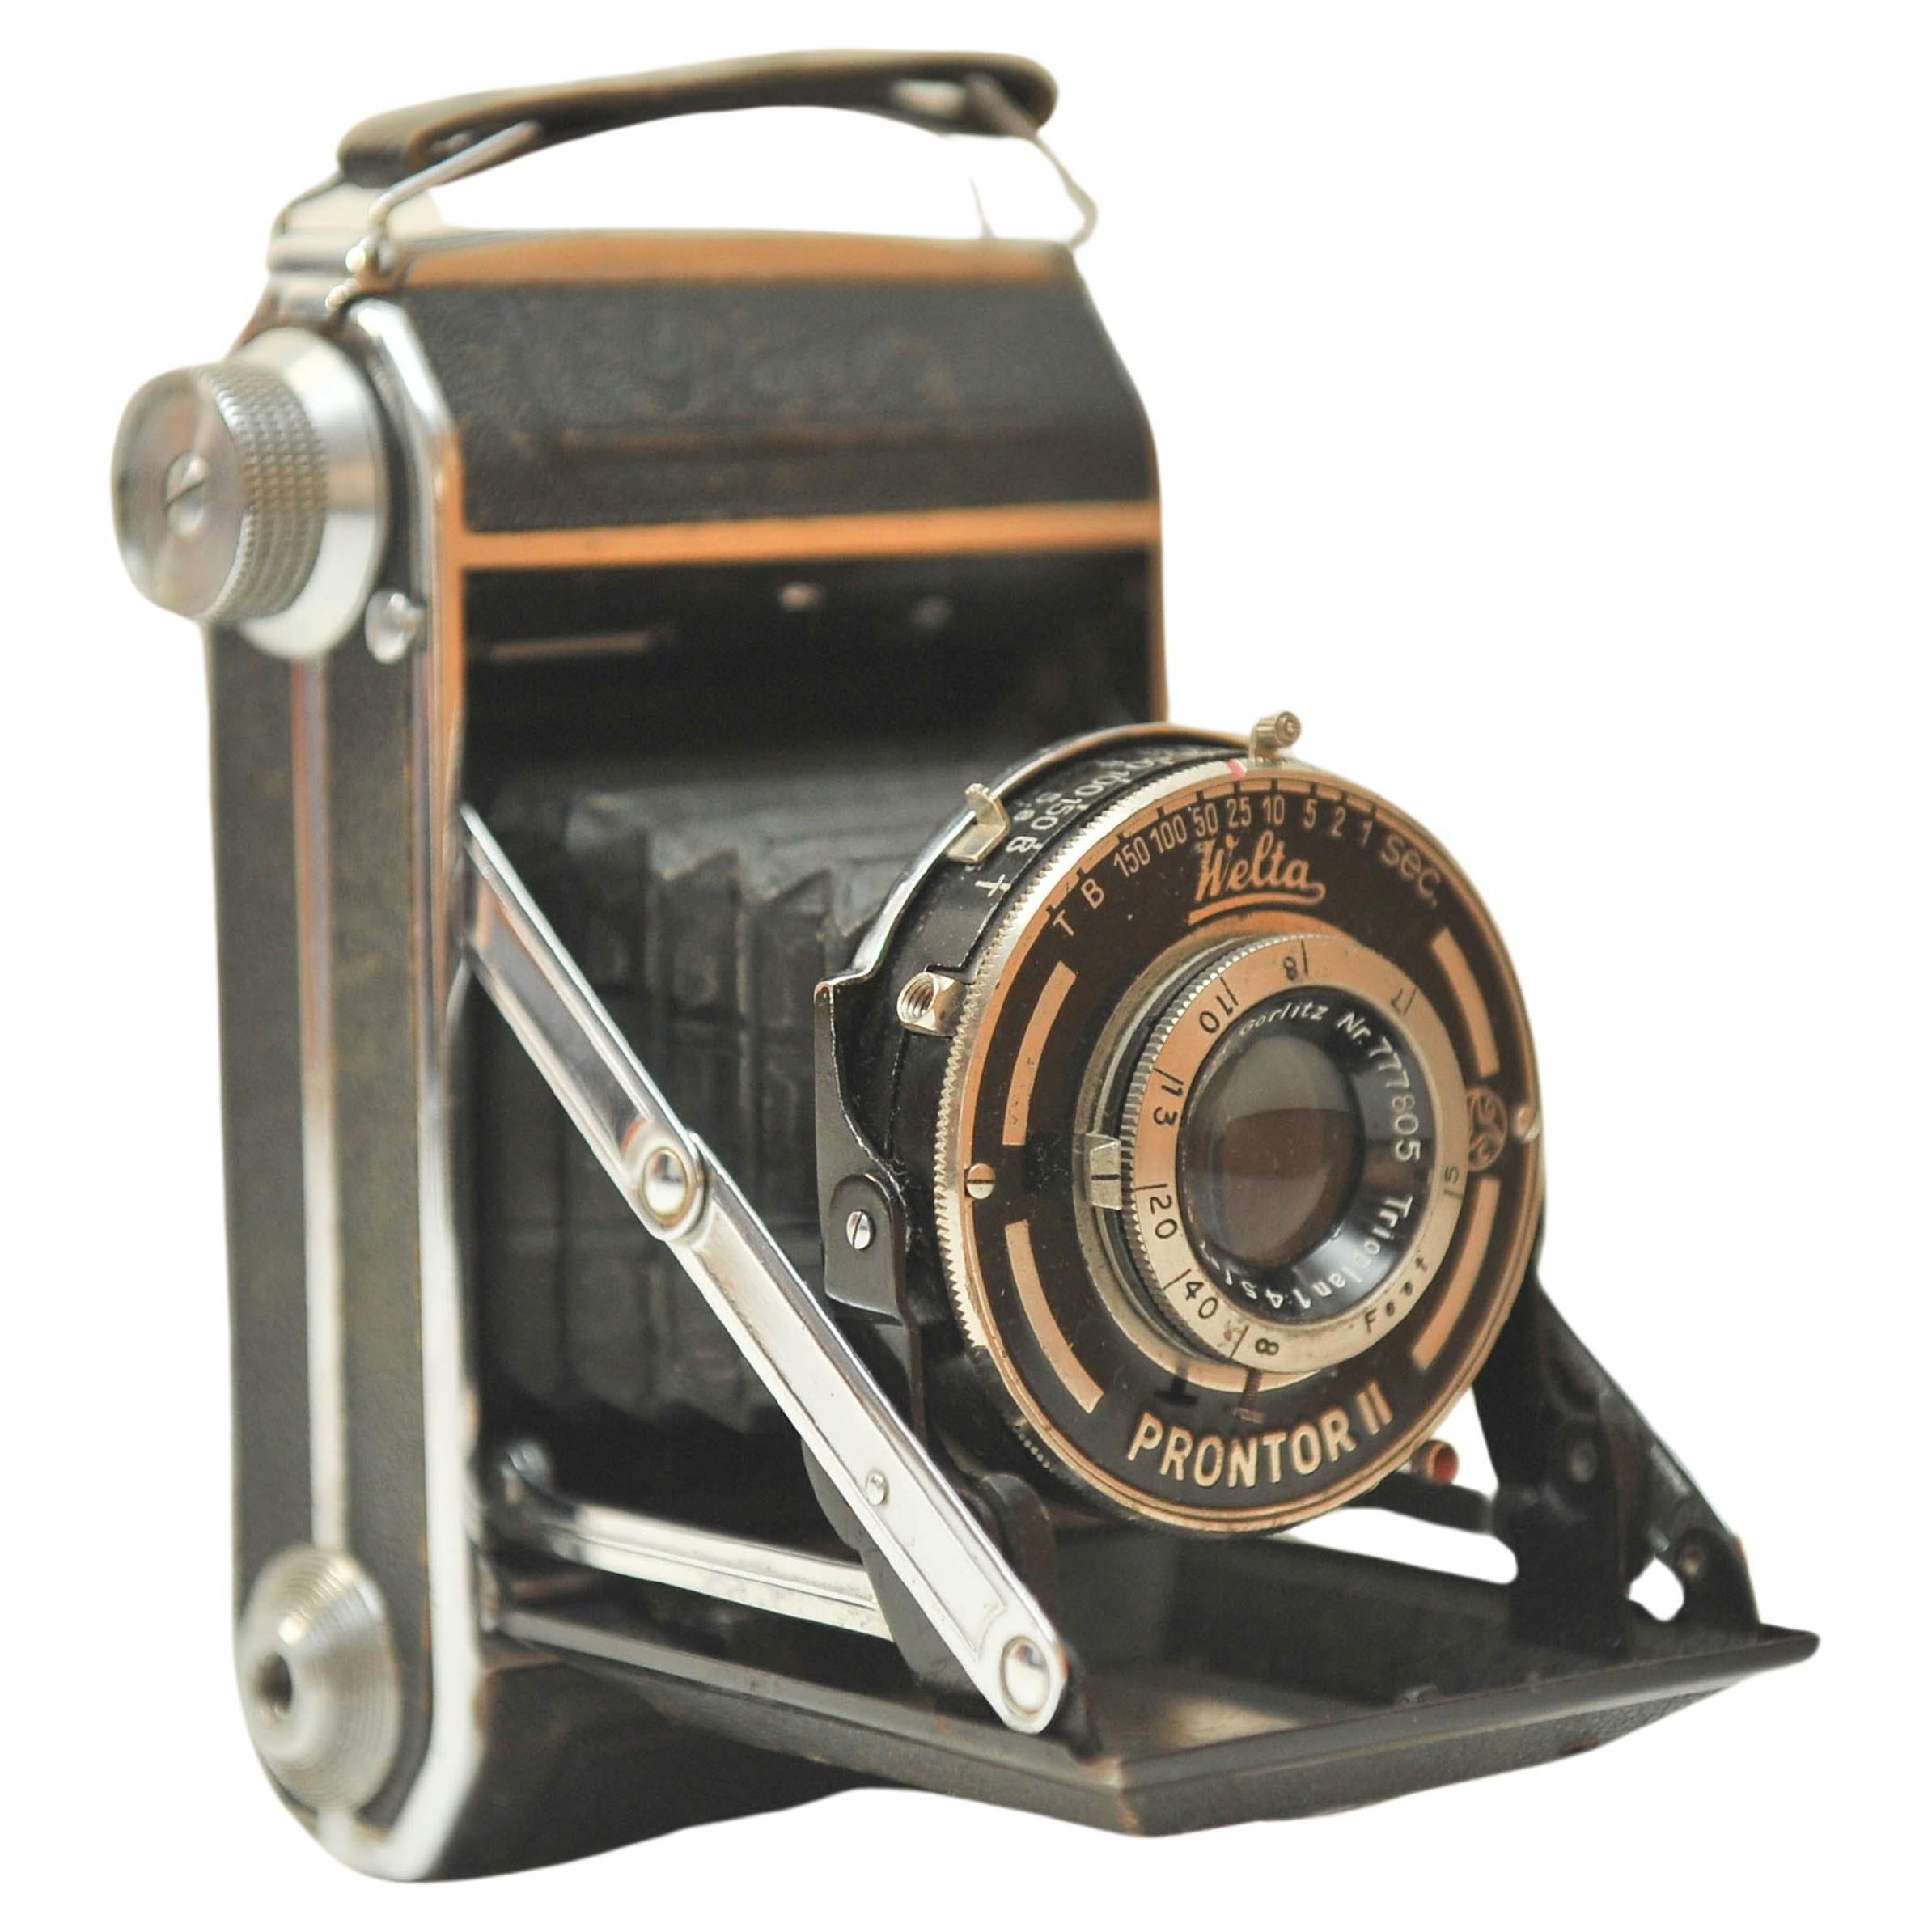 Welta Perle Prontor II Folding Bellow Camera with Meyer Görlitz Nr 777805 Trioplan 7.8cm F4.5 Lens 

Made in Germany

Welta was a successful camera maker based in Freital near Dresden.

The Perle is a series of folding cameras made by Welta in the